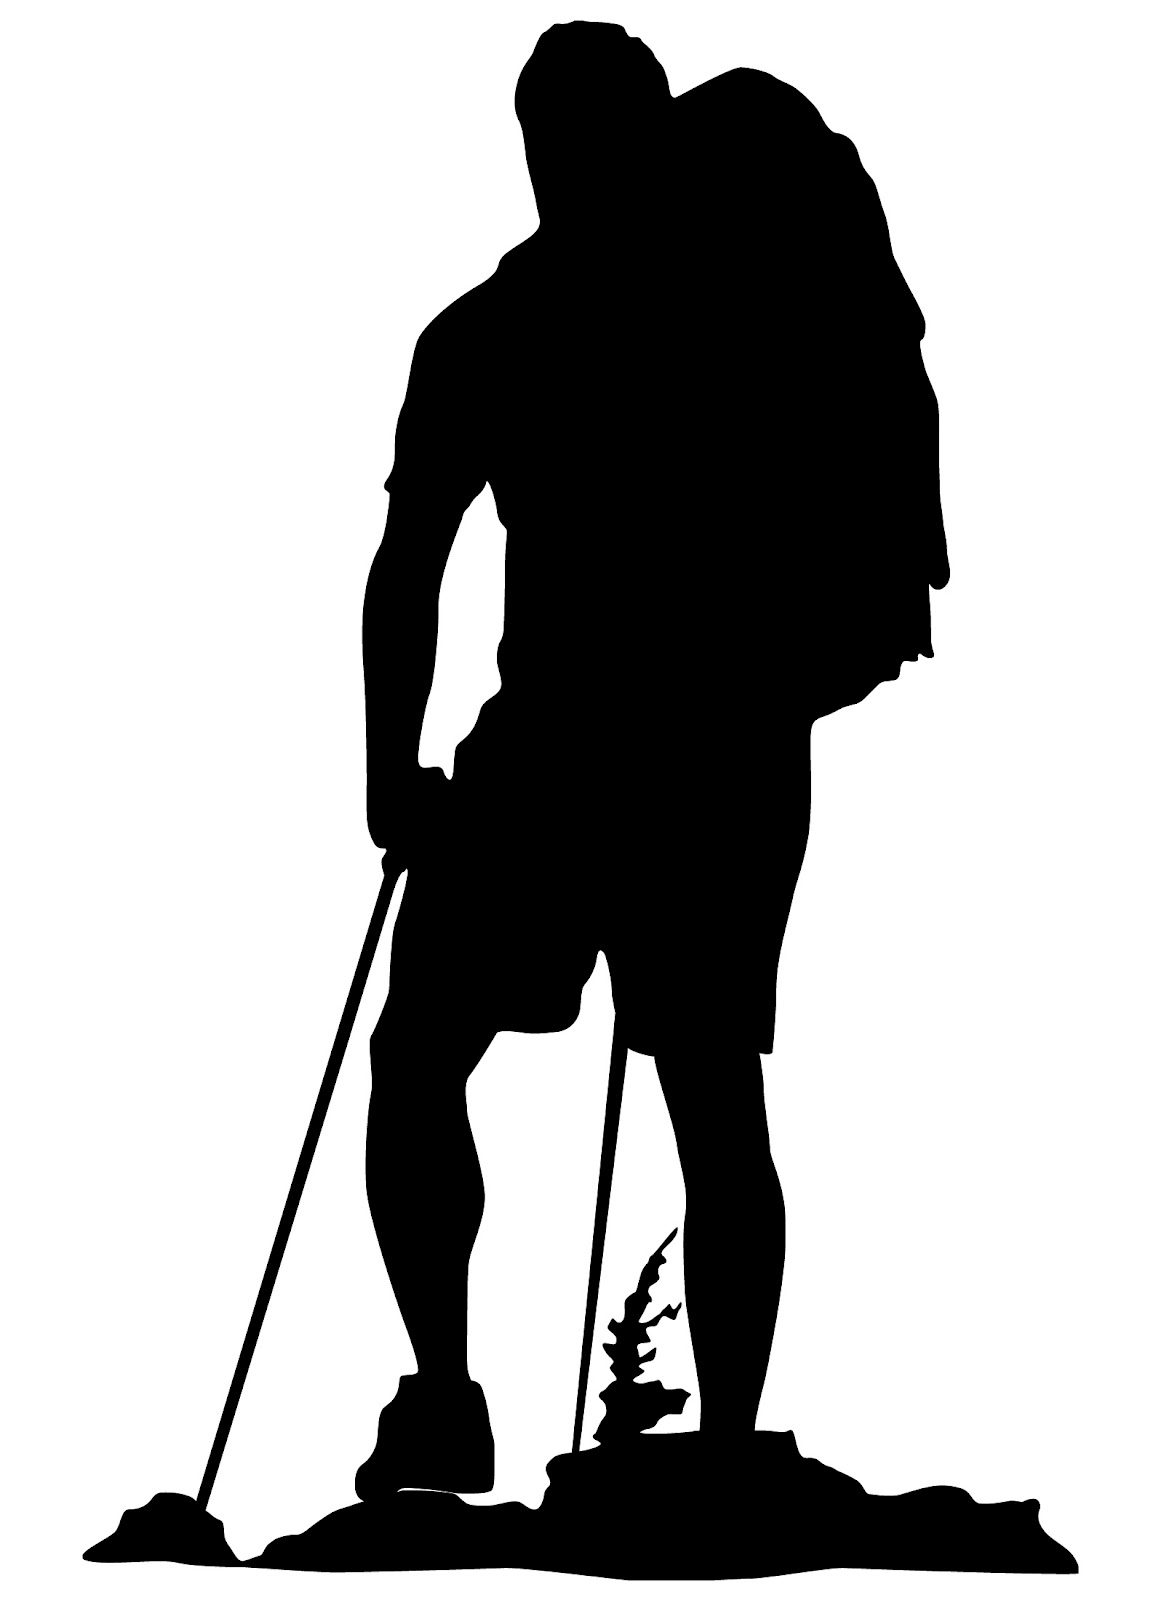 Hiker pictures boy scout hiking clip art image